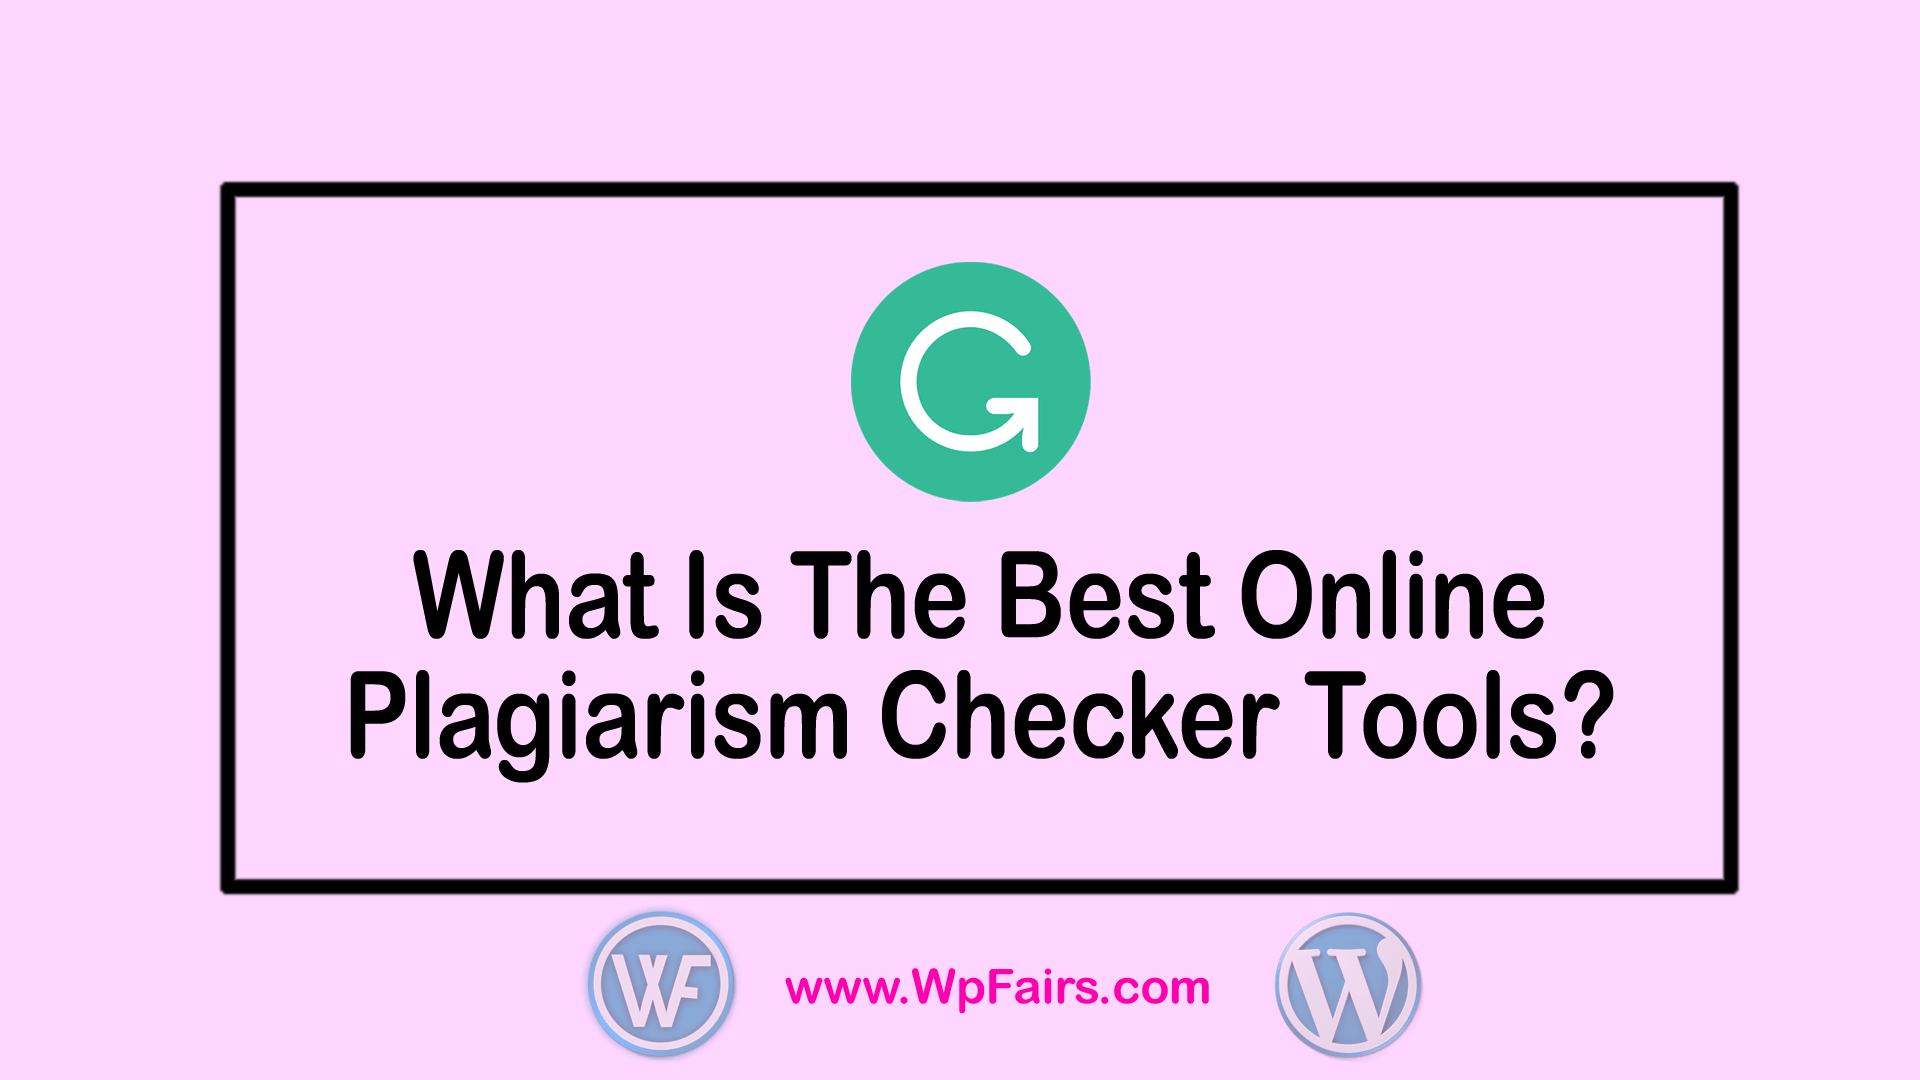 What Is The Best Online Plagiarism Checker Tools in 2020 - WpFairs